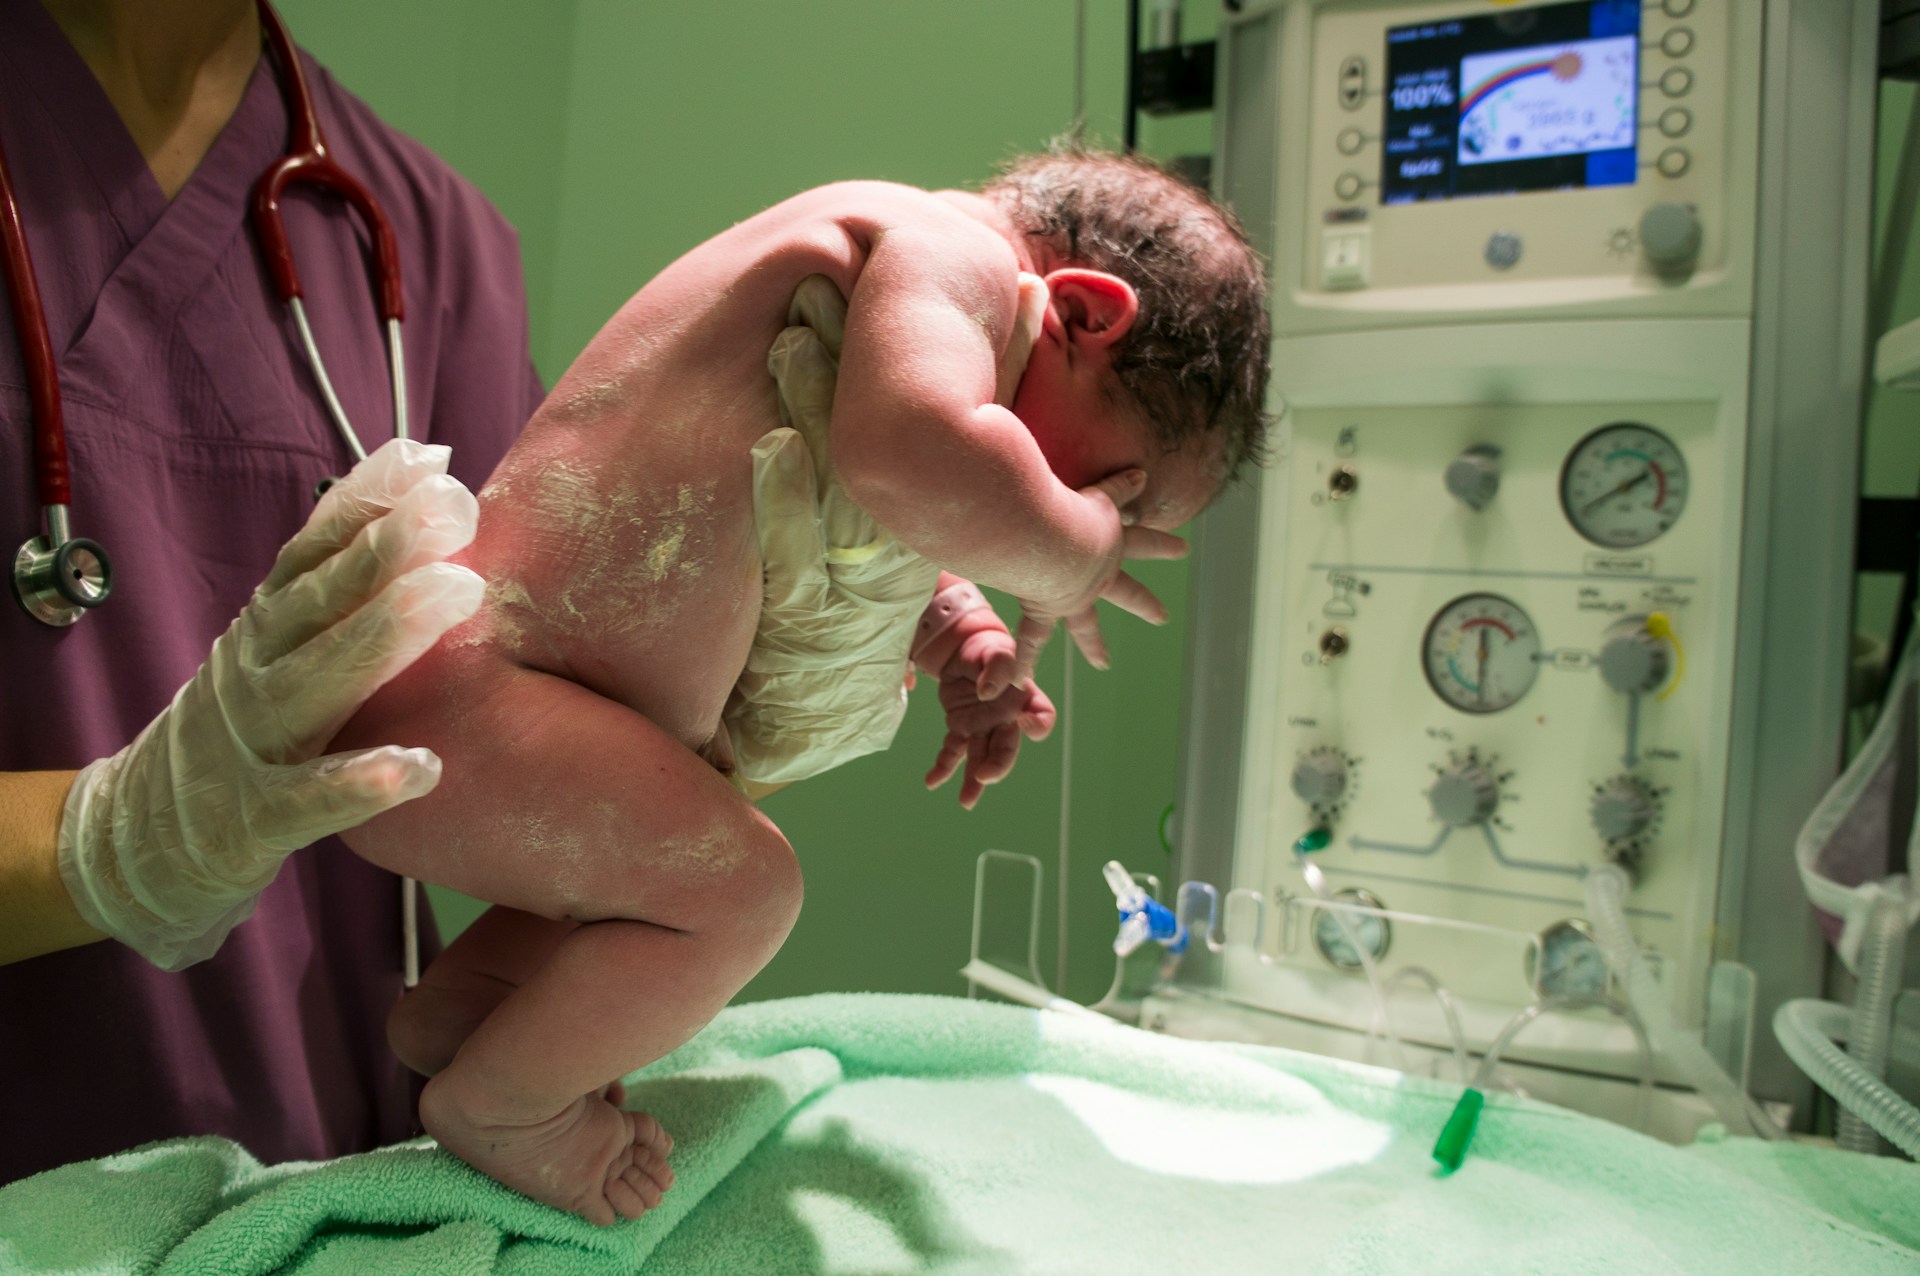 Every Infant Deserves a Fighting Chance at Life